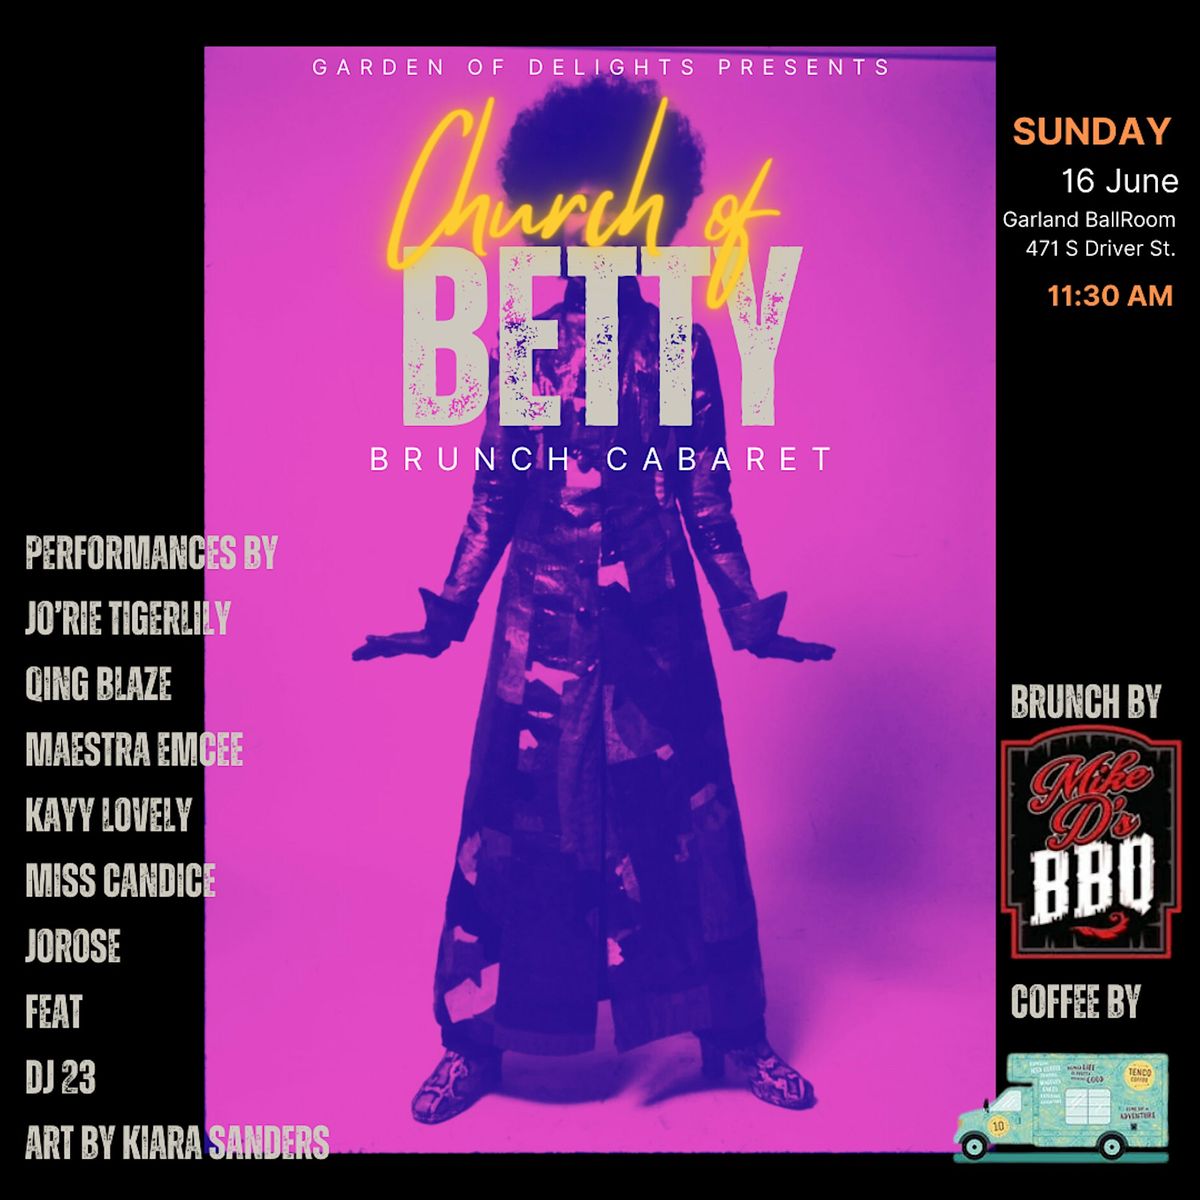 Cult Your Nights and Garden of Delights Presents: Church Of Betty